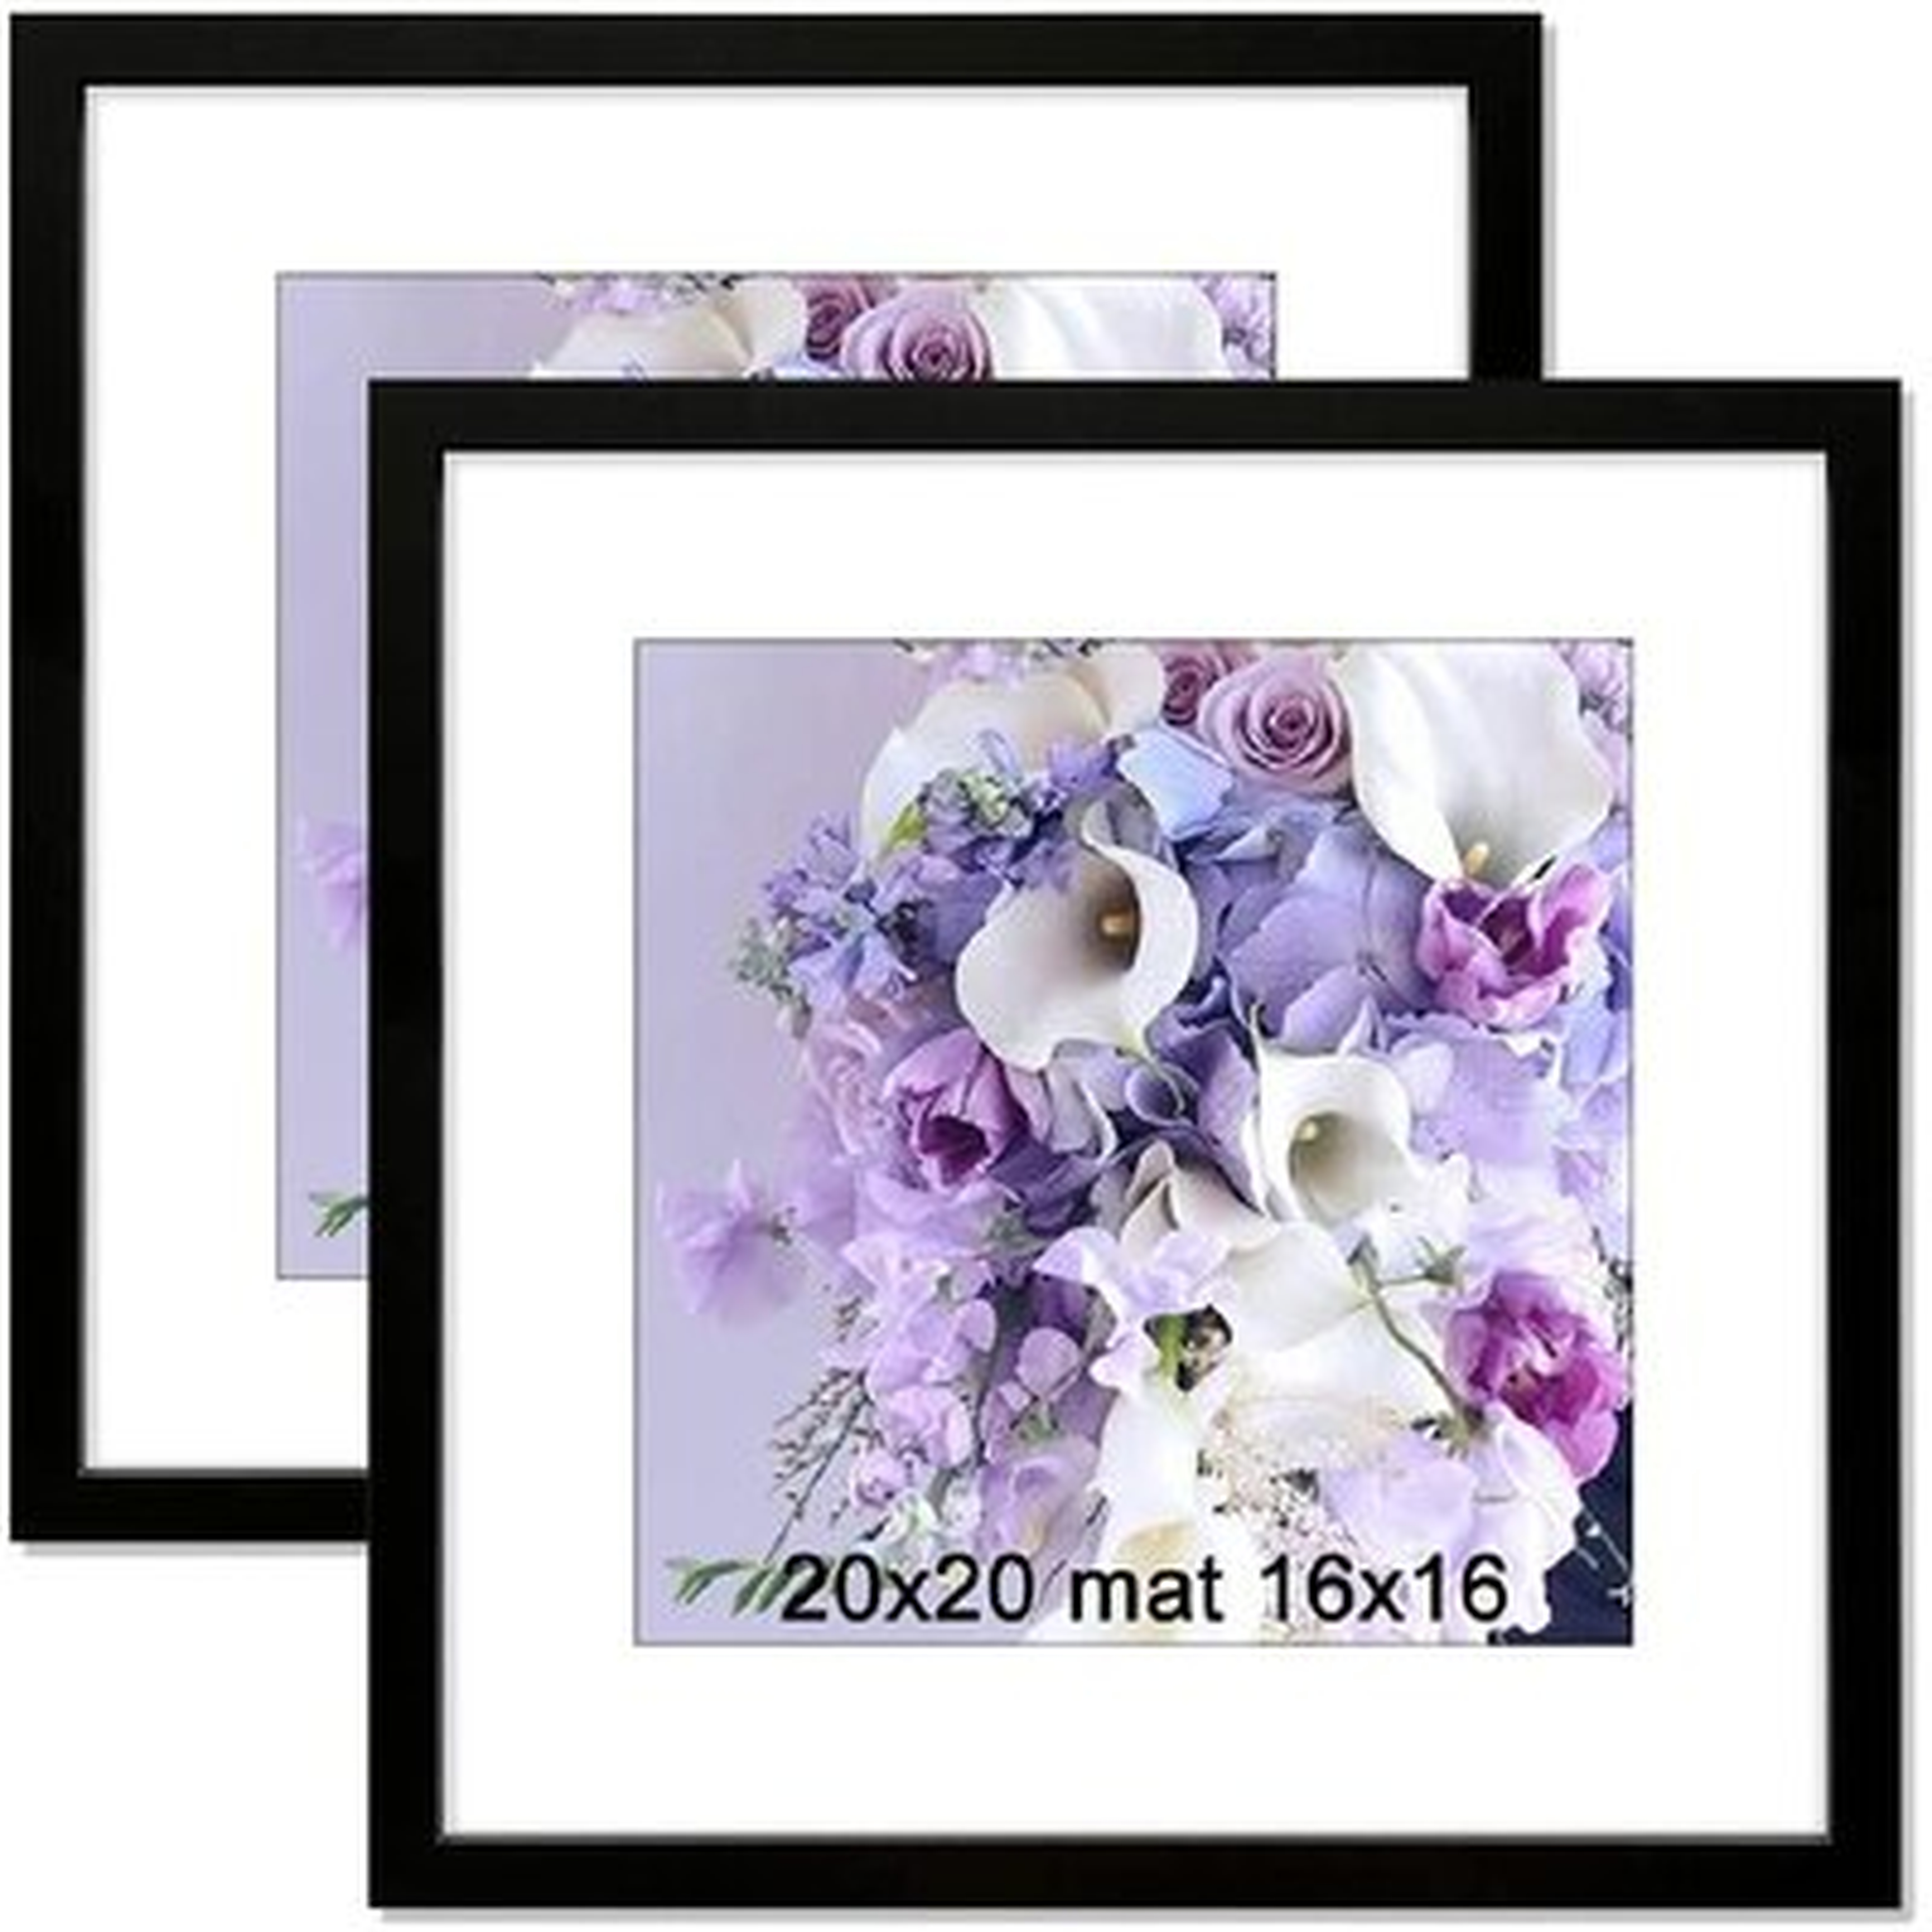 Frame Luxury Picture Frame Wall Hanging, Display Picture Without Mat, Poster Photo Frame - Wayfair